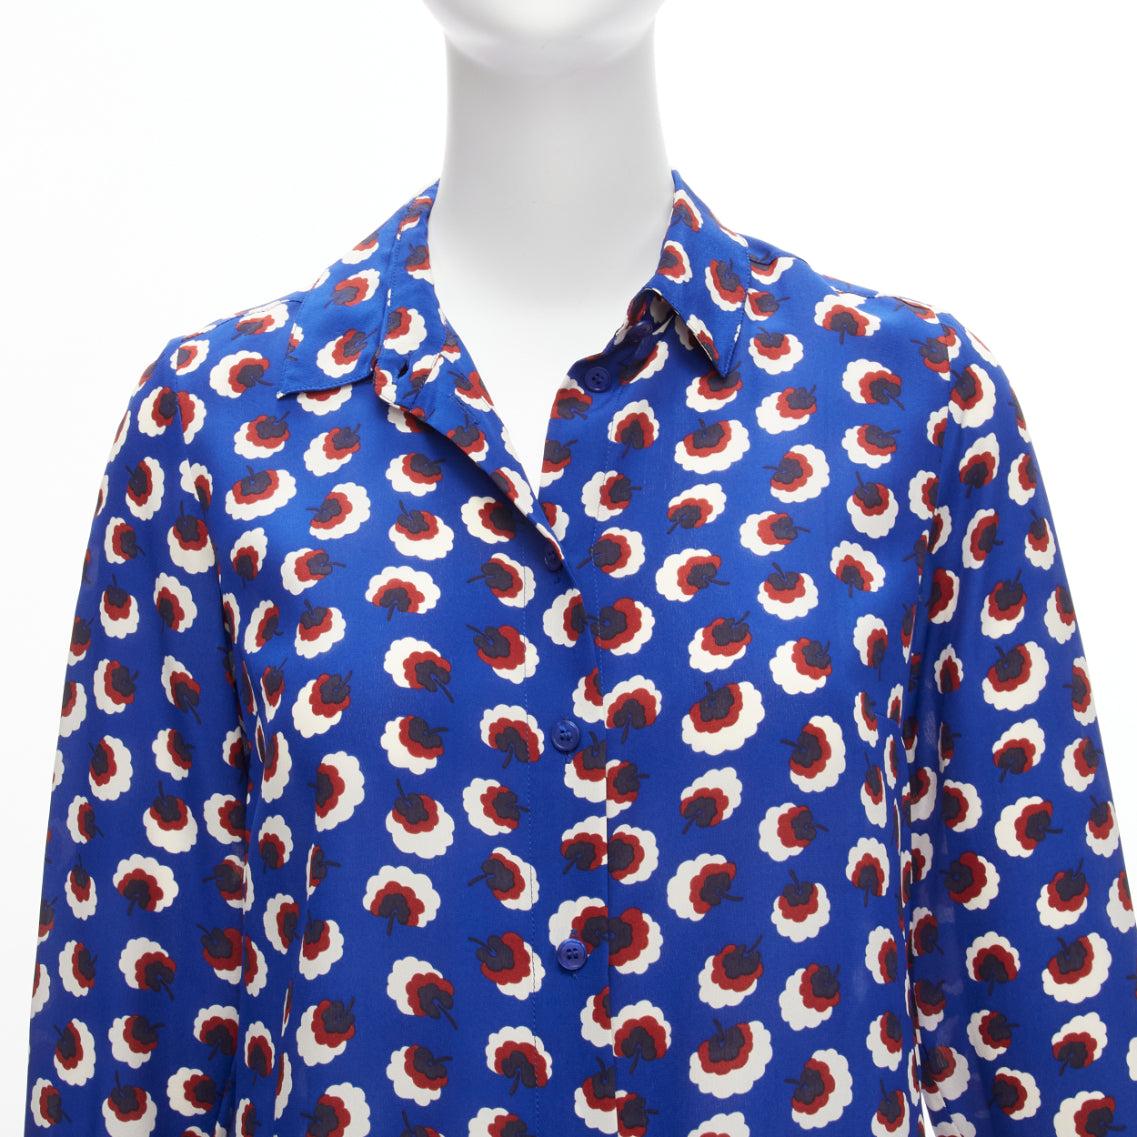 STELLA MCCARTNEY 2014 100% silk blue red white floral print bishop sleeve shirt IT36 S
Reference: SNKO/A00228
Brand: Stella McCartney
Designer: Stella McCartney
Collection: 2014
Material: Silk
Color: Blue, Multicolour
Pattern: Floral
Closure: